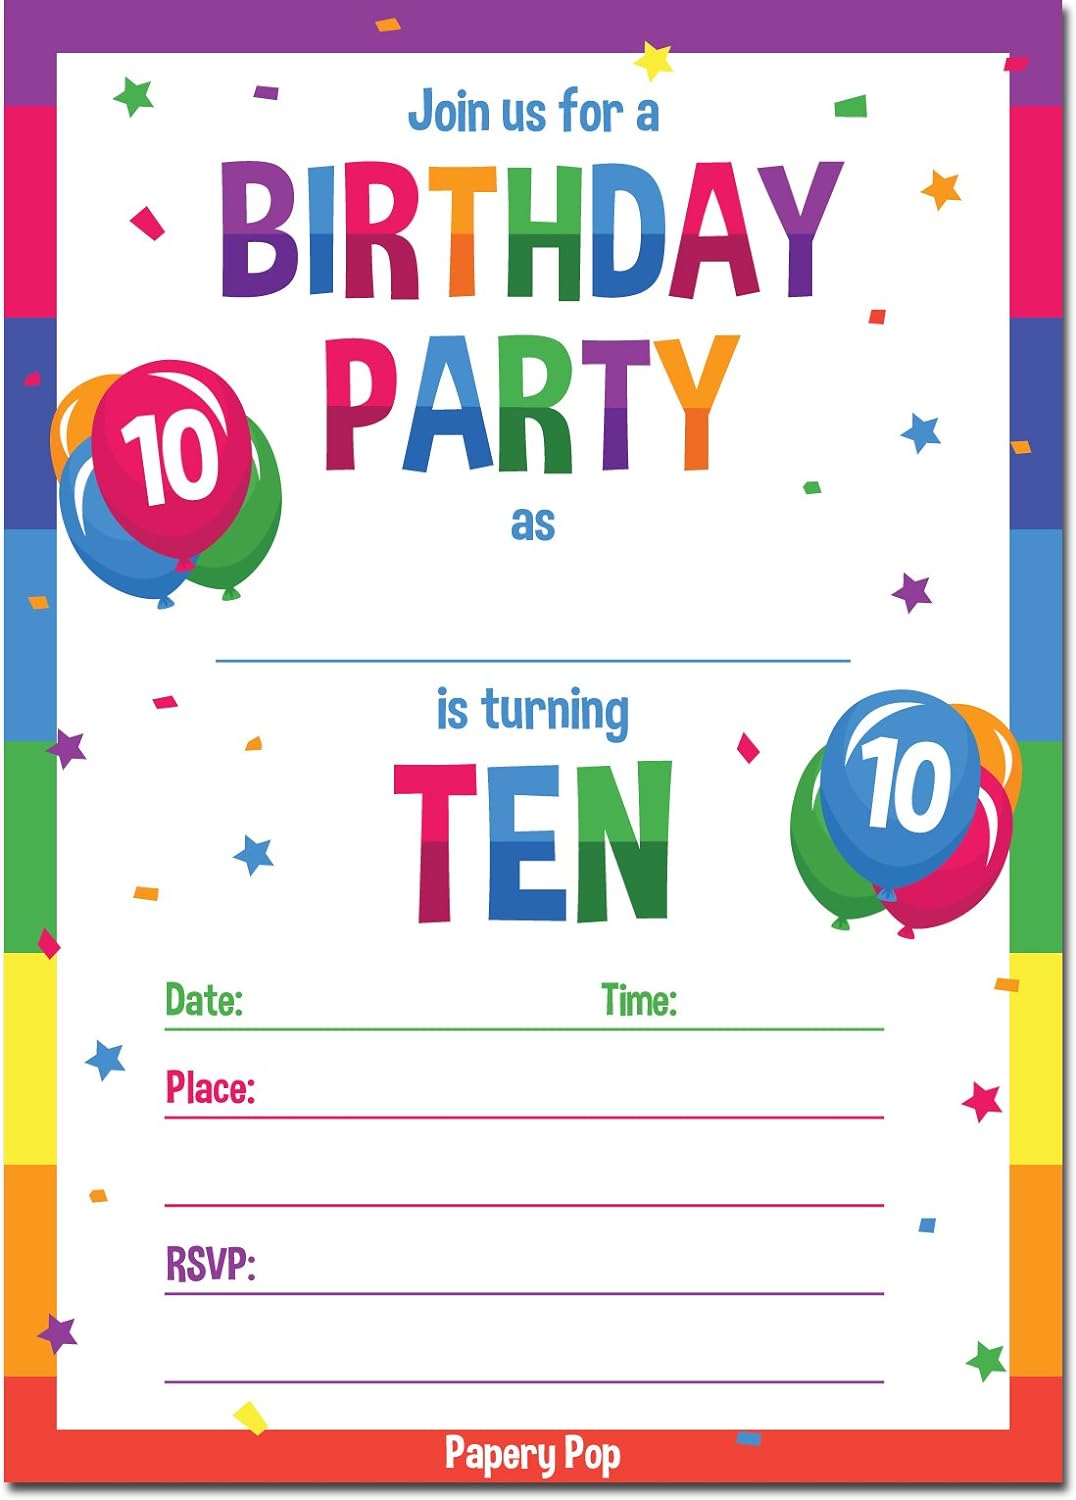  Papery Pop 10th Birthday Party Invitations With, big gift ideas for 10 year old boy